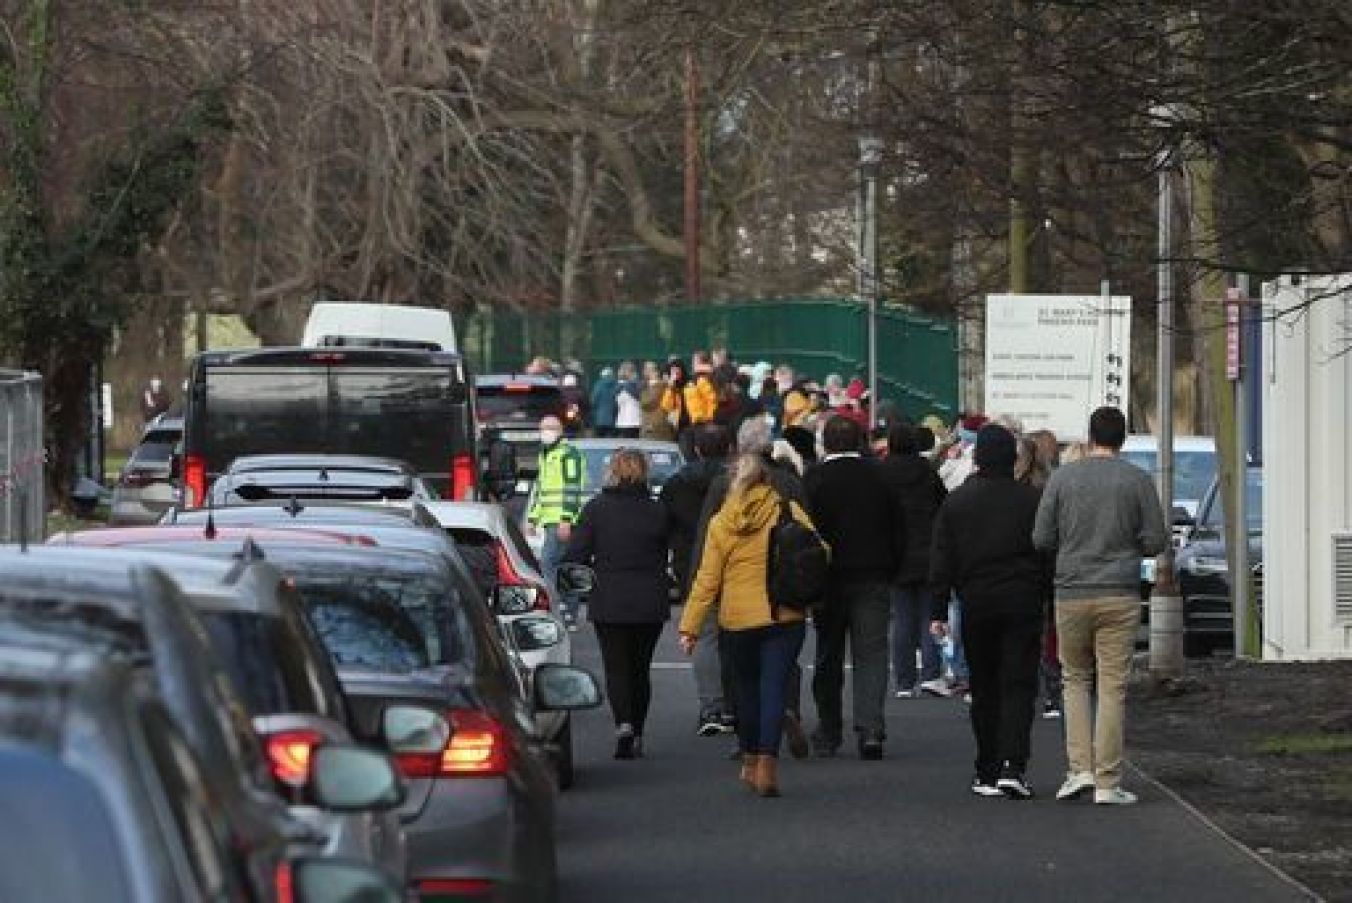 Cars And People Queueing At The Vaccination Centre In Phoenix Park, Dublin, As Mass Vaccination Drive For Gps And Practice Nurses Has Begun In Ireland.